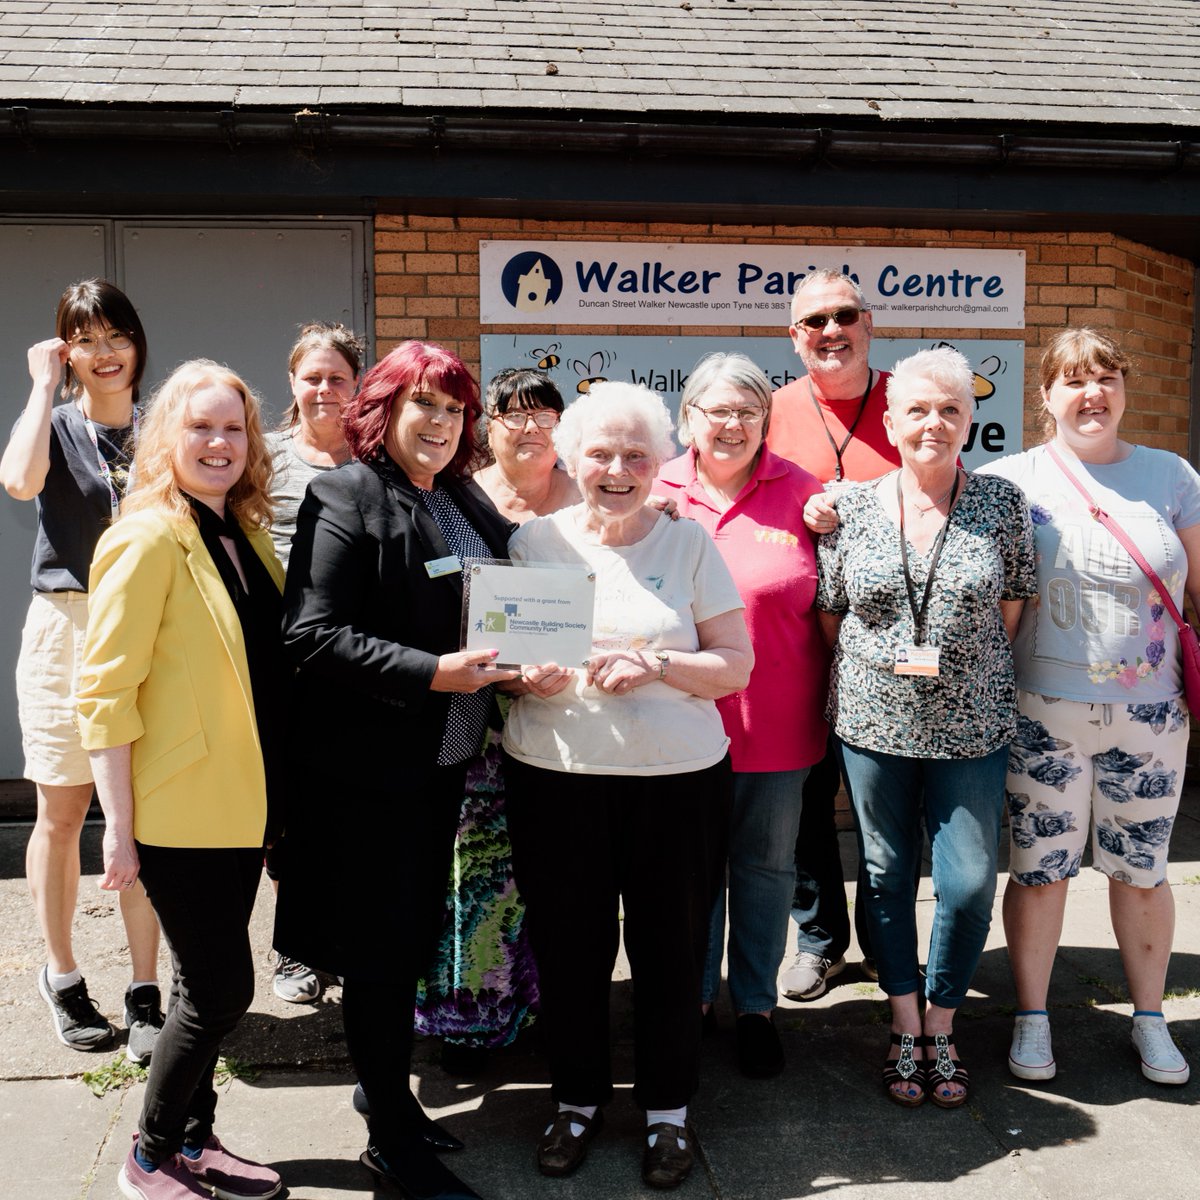 We’re delighted to have been able to support @YMCANewcastle through our Community Fund at the @CFTyneWearNland The grant was used to tackle social isolation among older people by supporting their free friendship group at Walker Parish Church. Read more: bit.ly/3OsrWfj